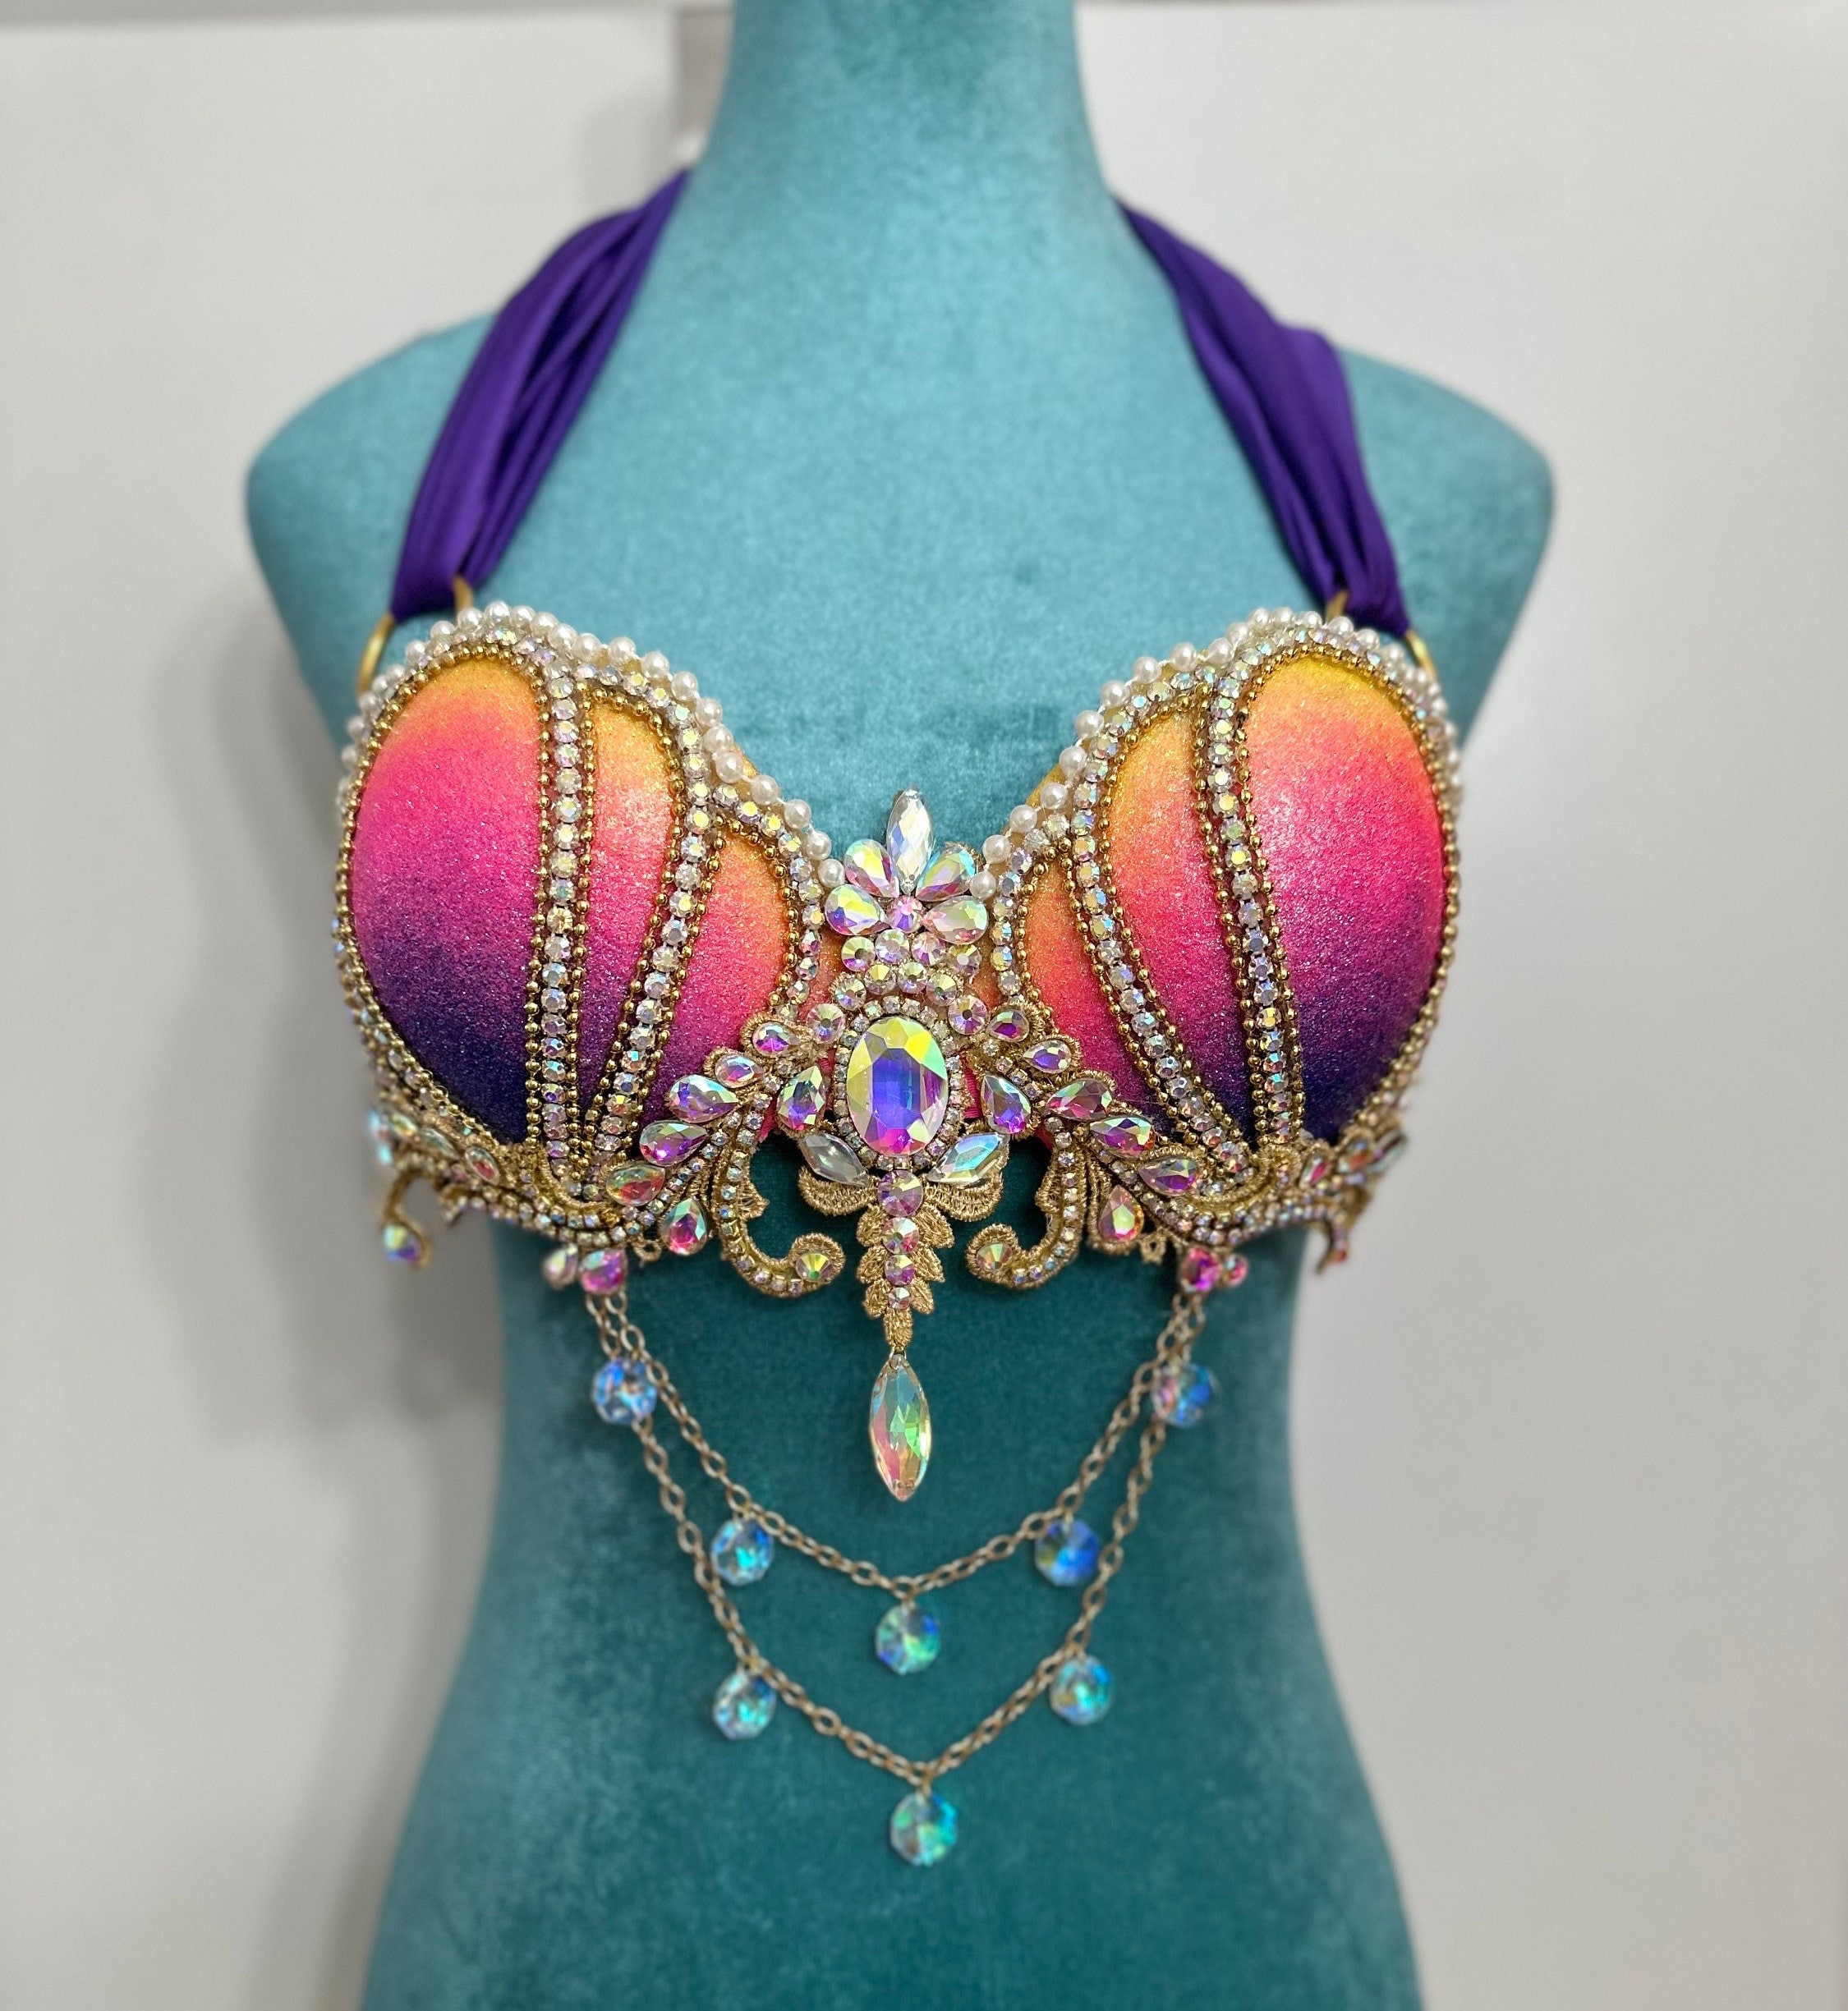 Handmade Vintage Style Mermaid Bellydance Costume Bra and Belt Set With  Crystal, Pearls and Trim 